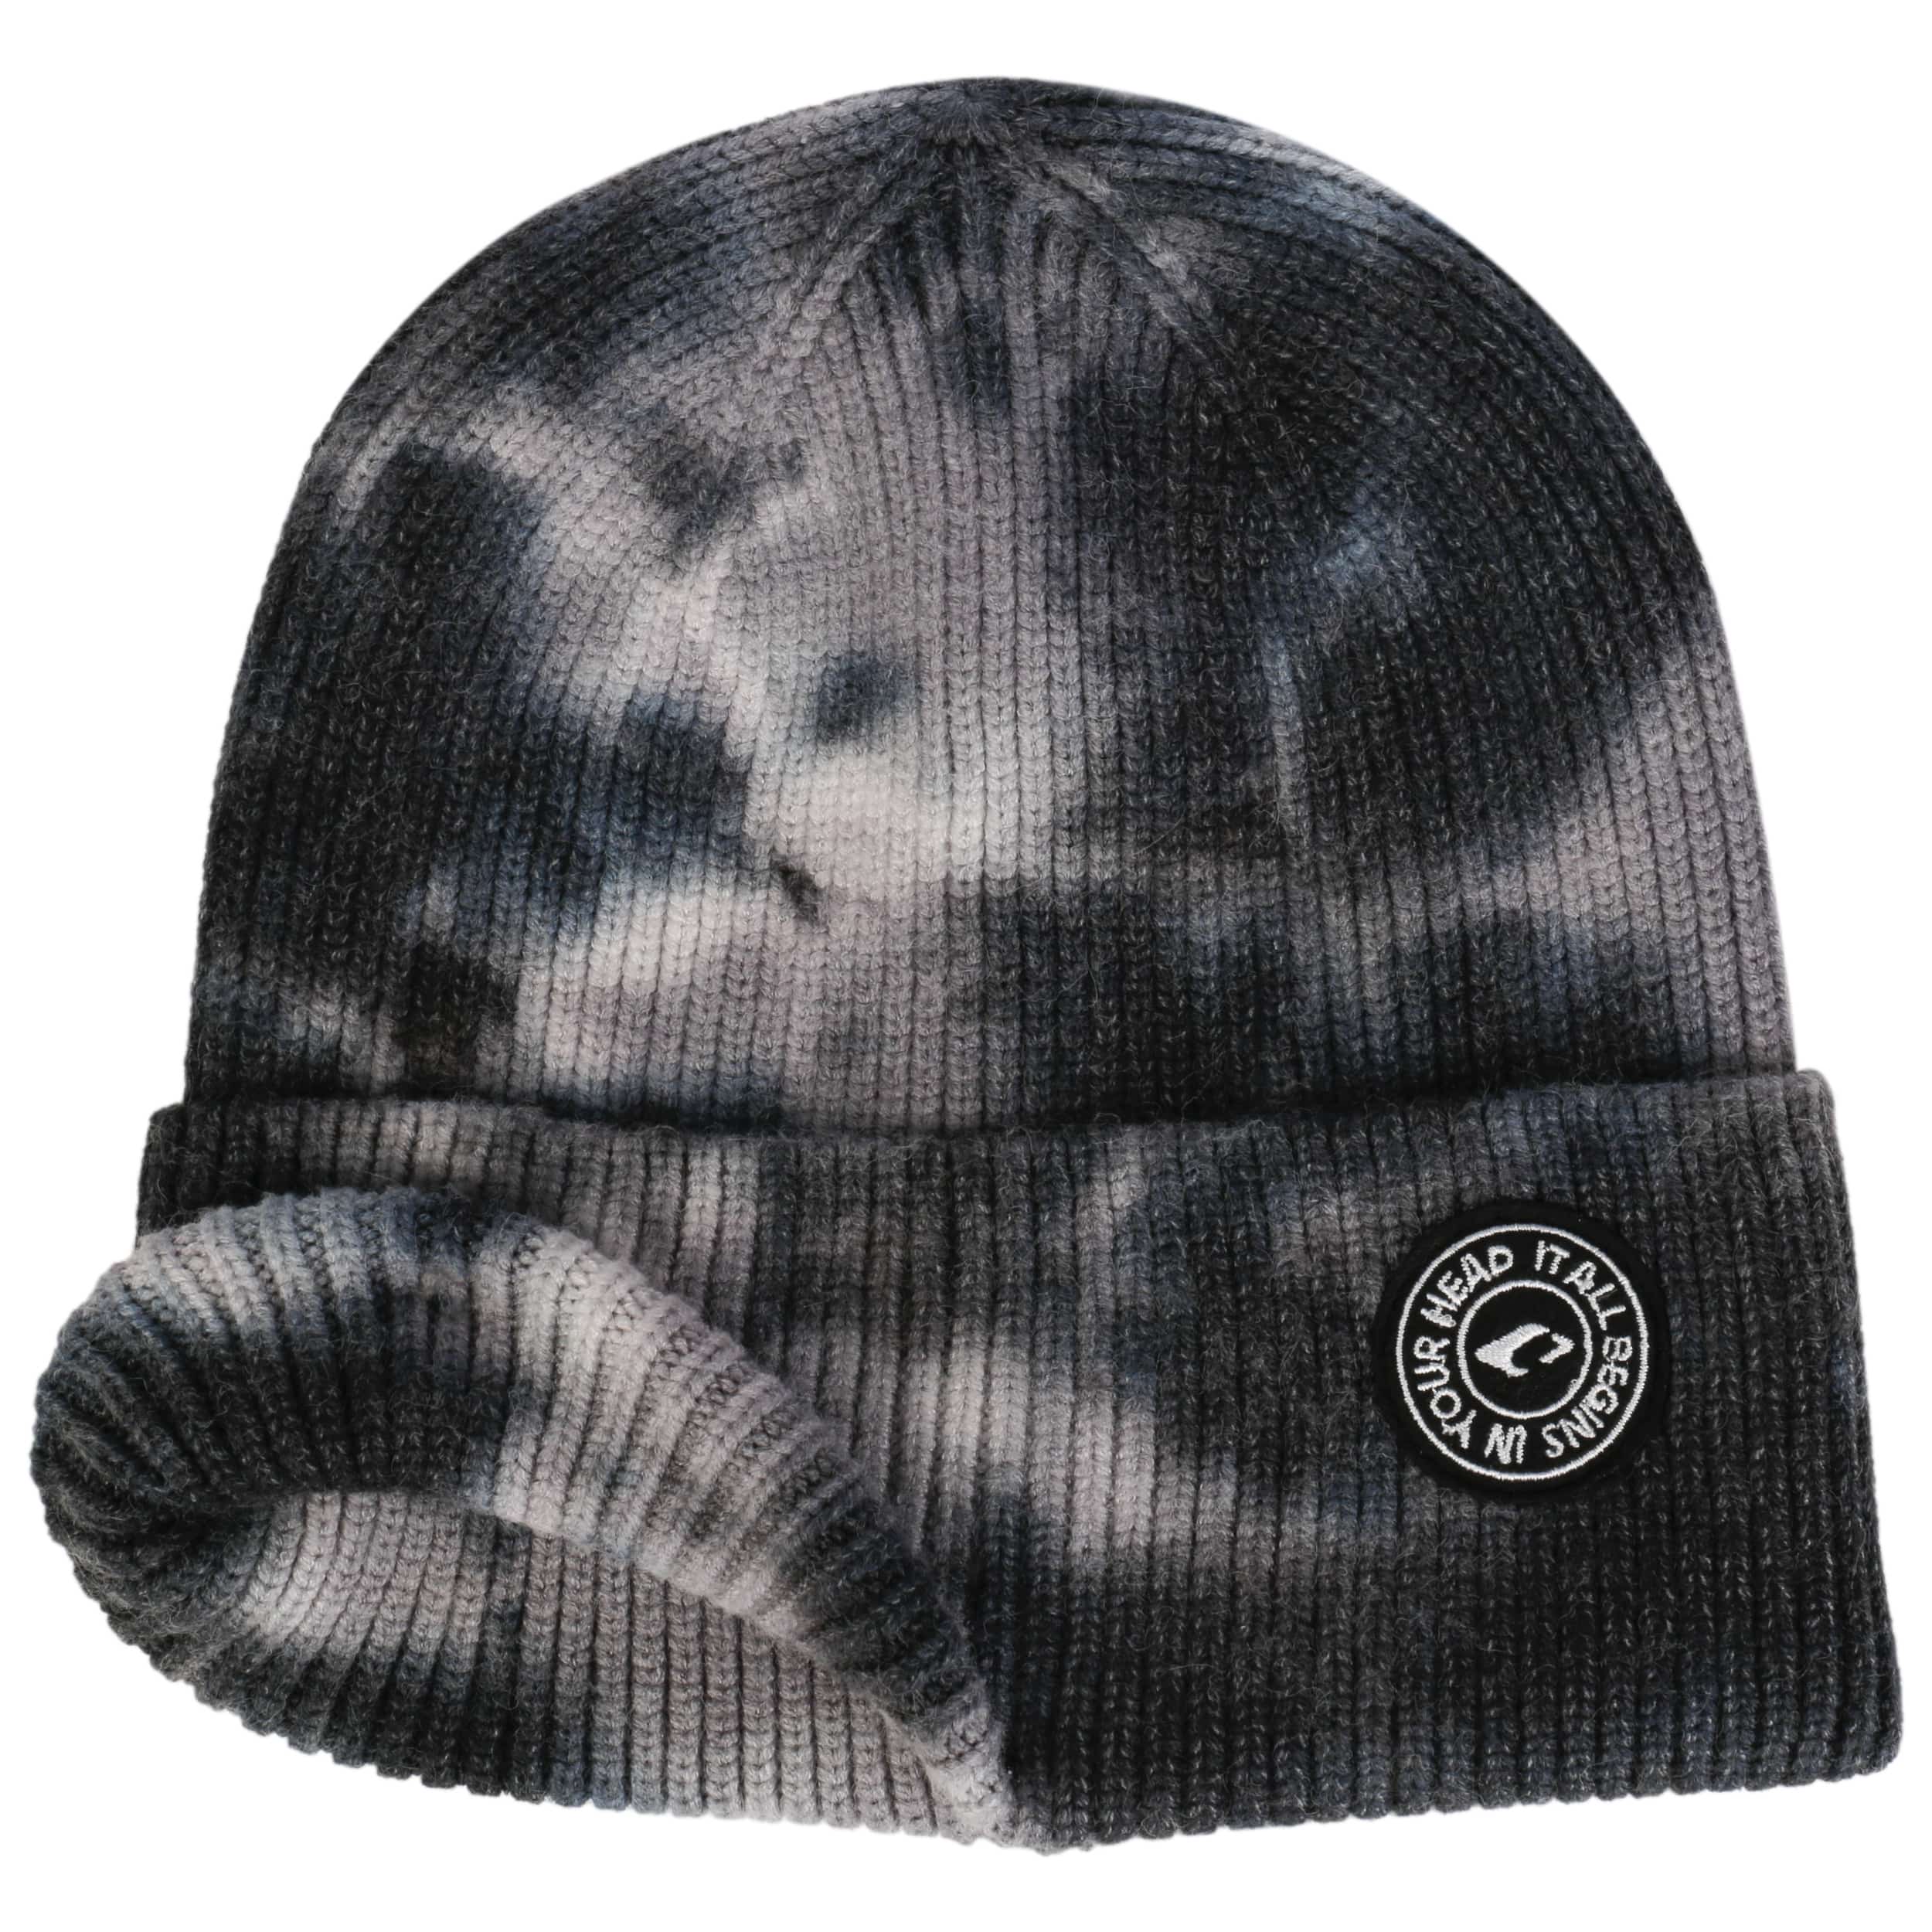 Yuna Tie € - 28,95 Hat Beanie Chillouts Dye by